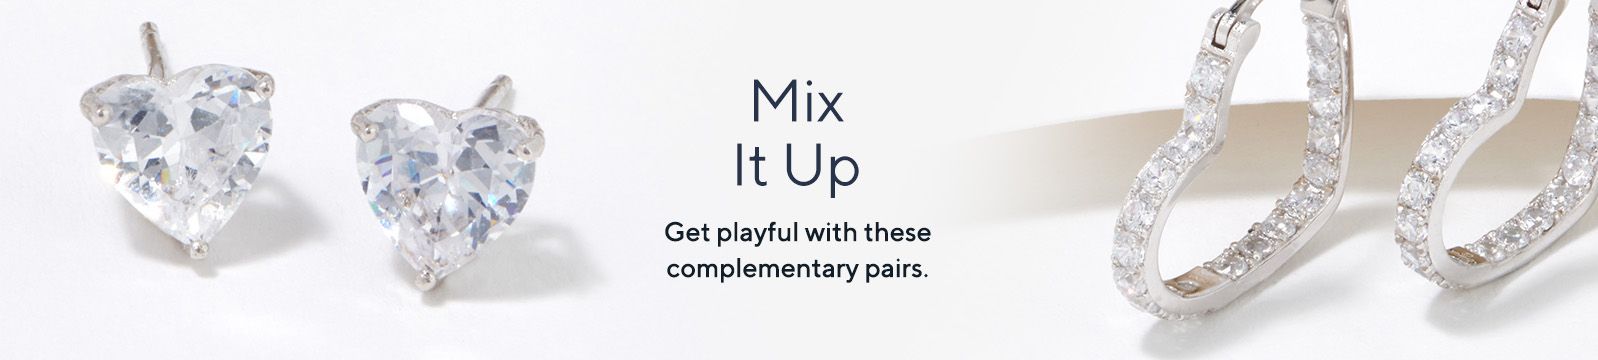 Mix It Up. Get playful with these complementary pairs.